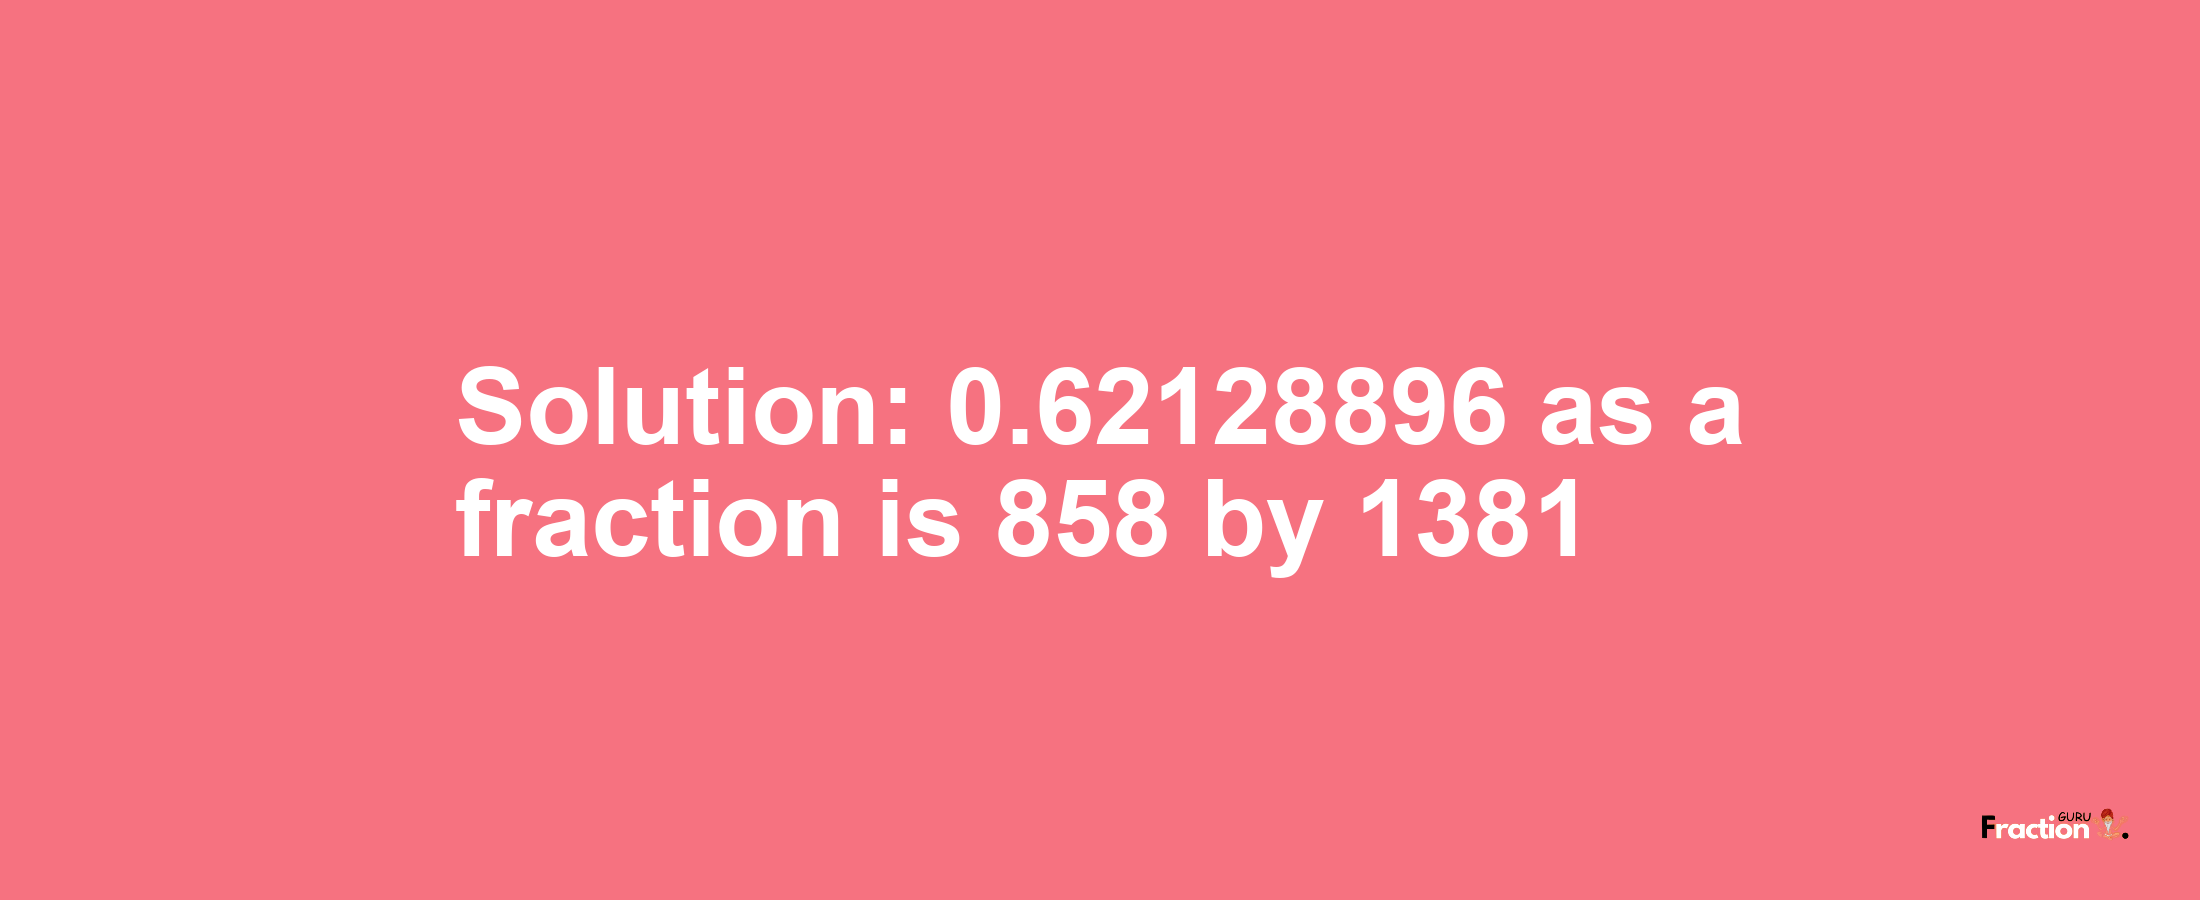 Solution:0.62128896 as a fraction is 858/1381